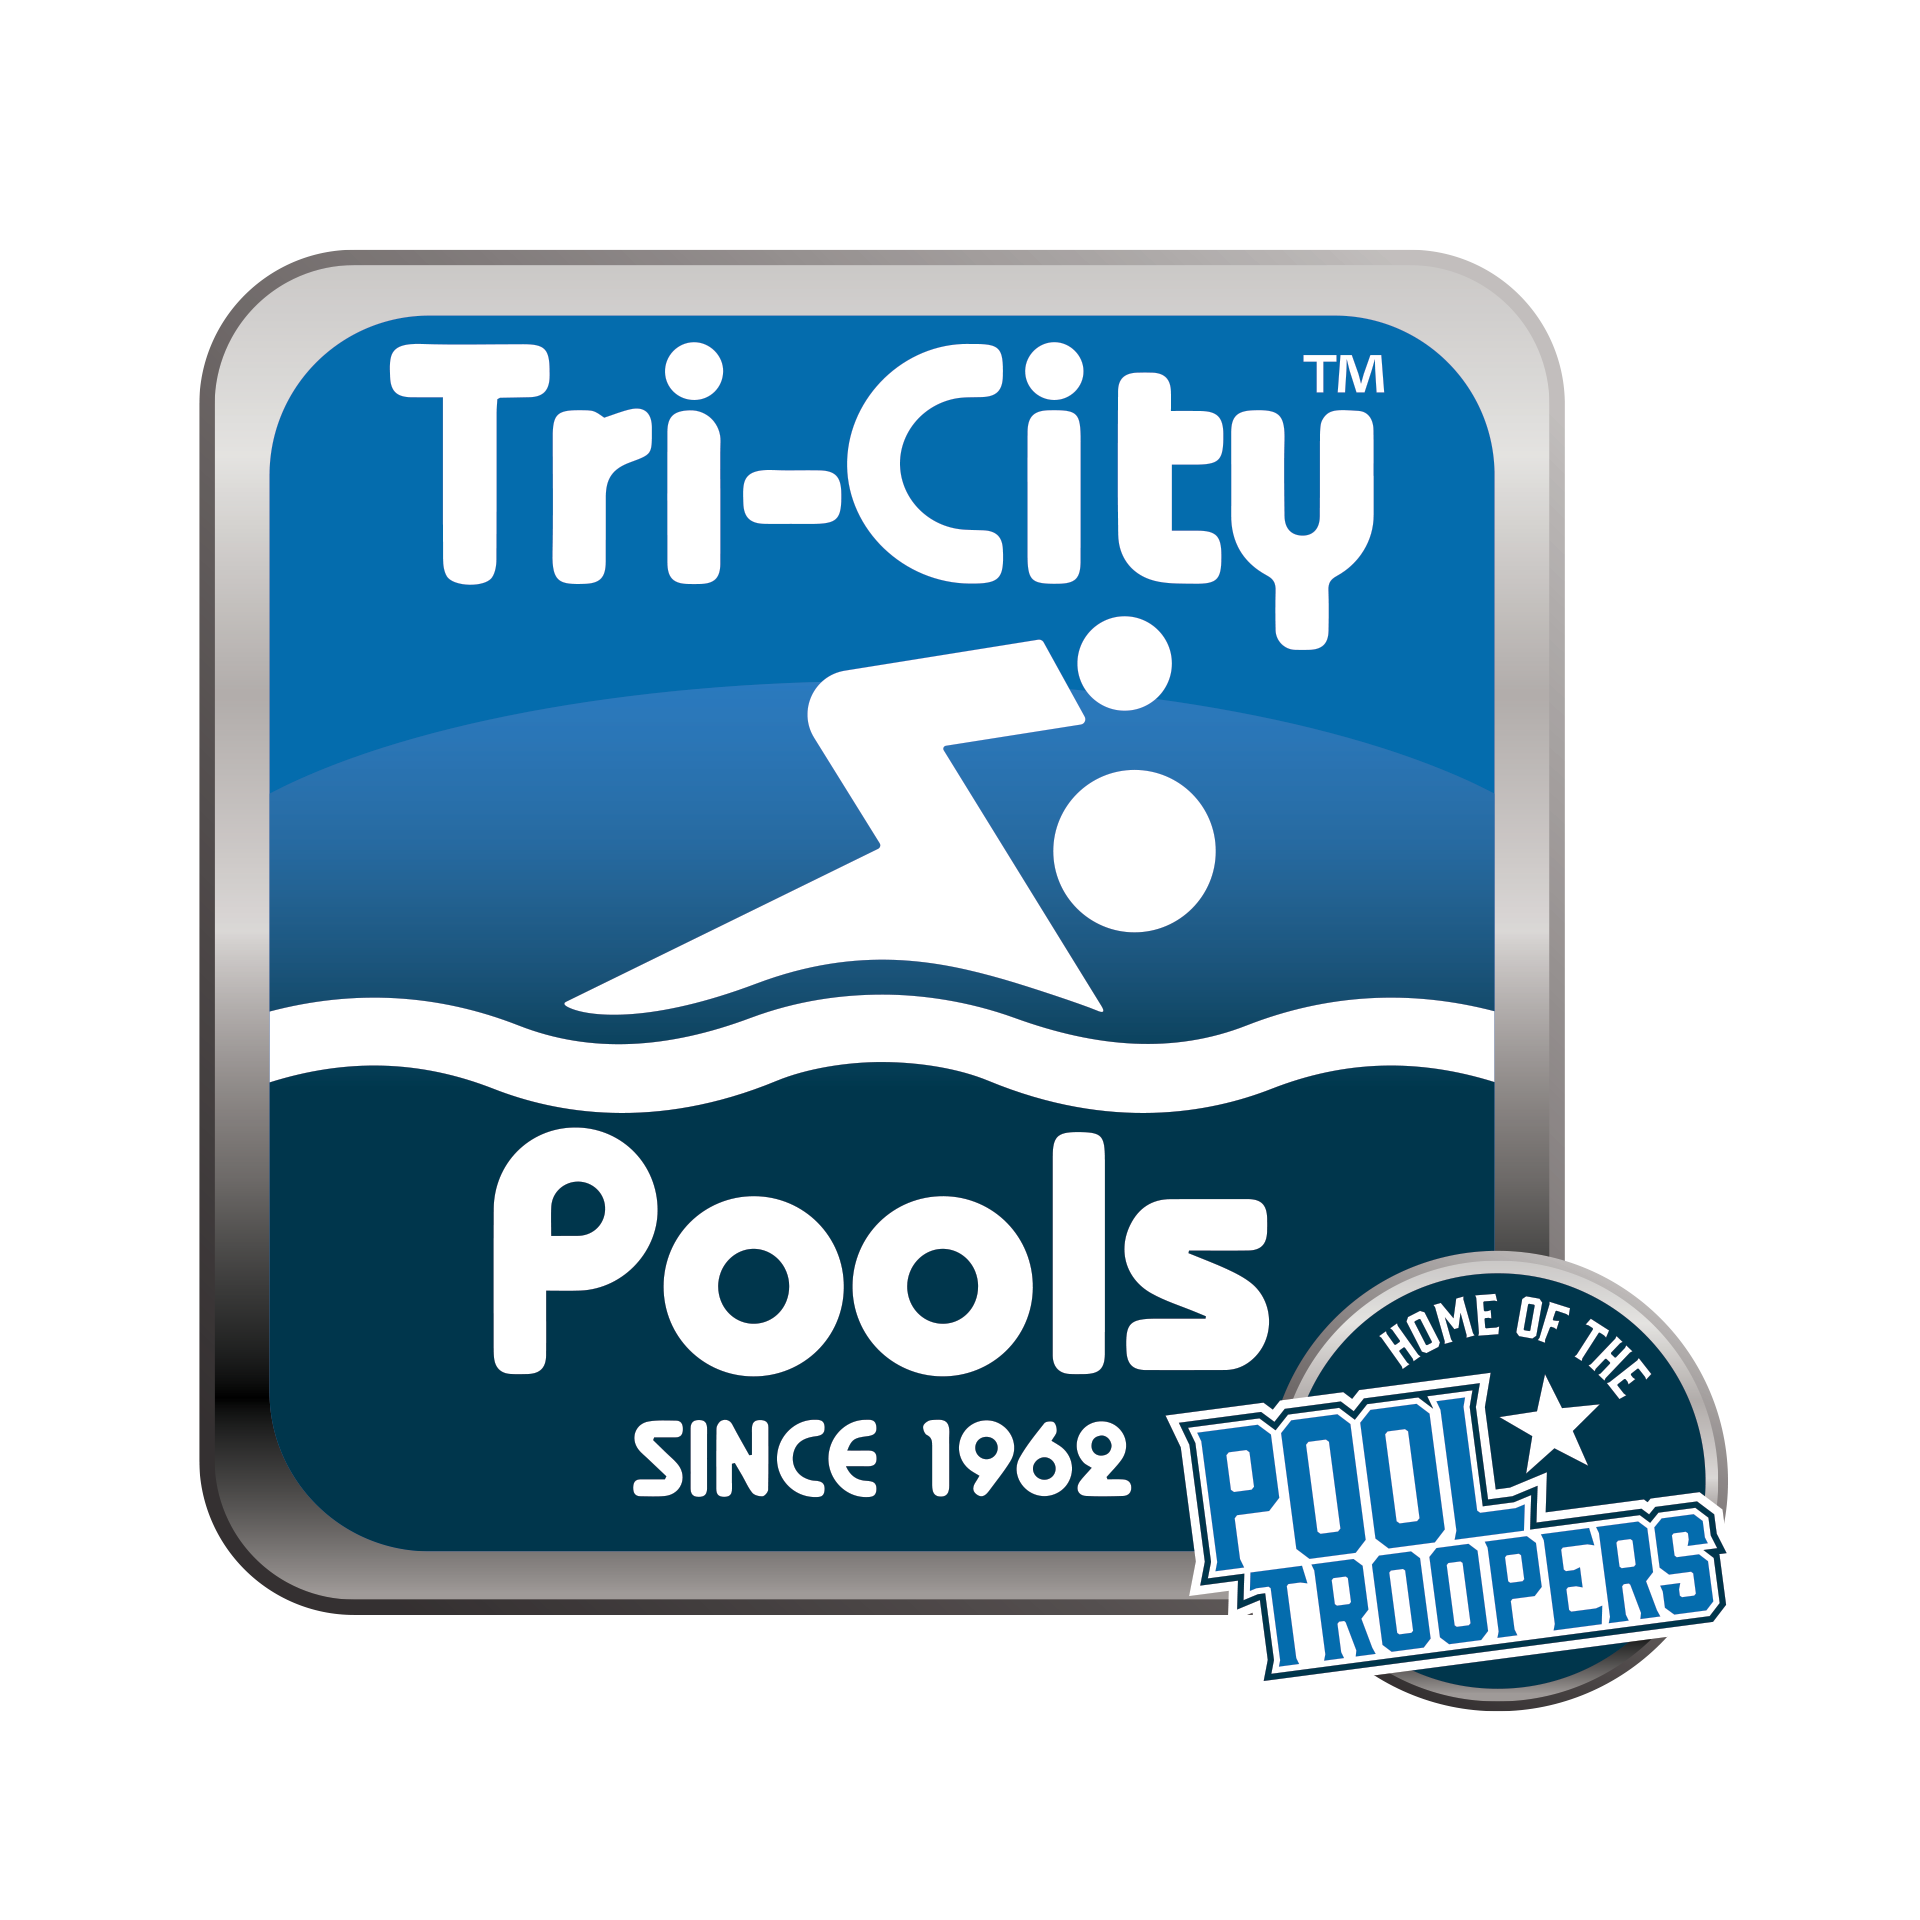 Pool Troopers Partners with Tri-City Pools to Expand Southwest Florida Footprint